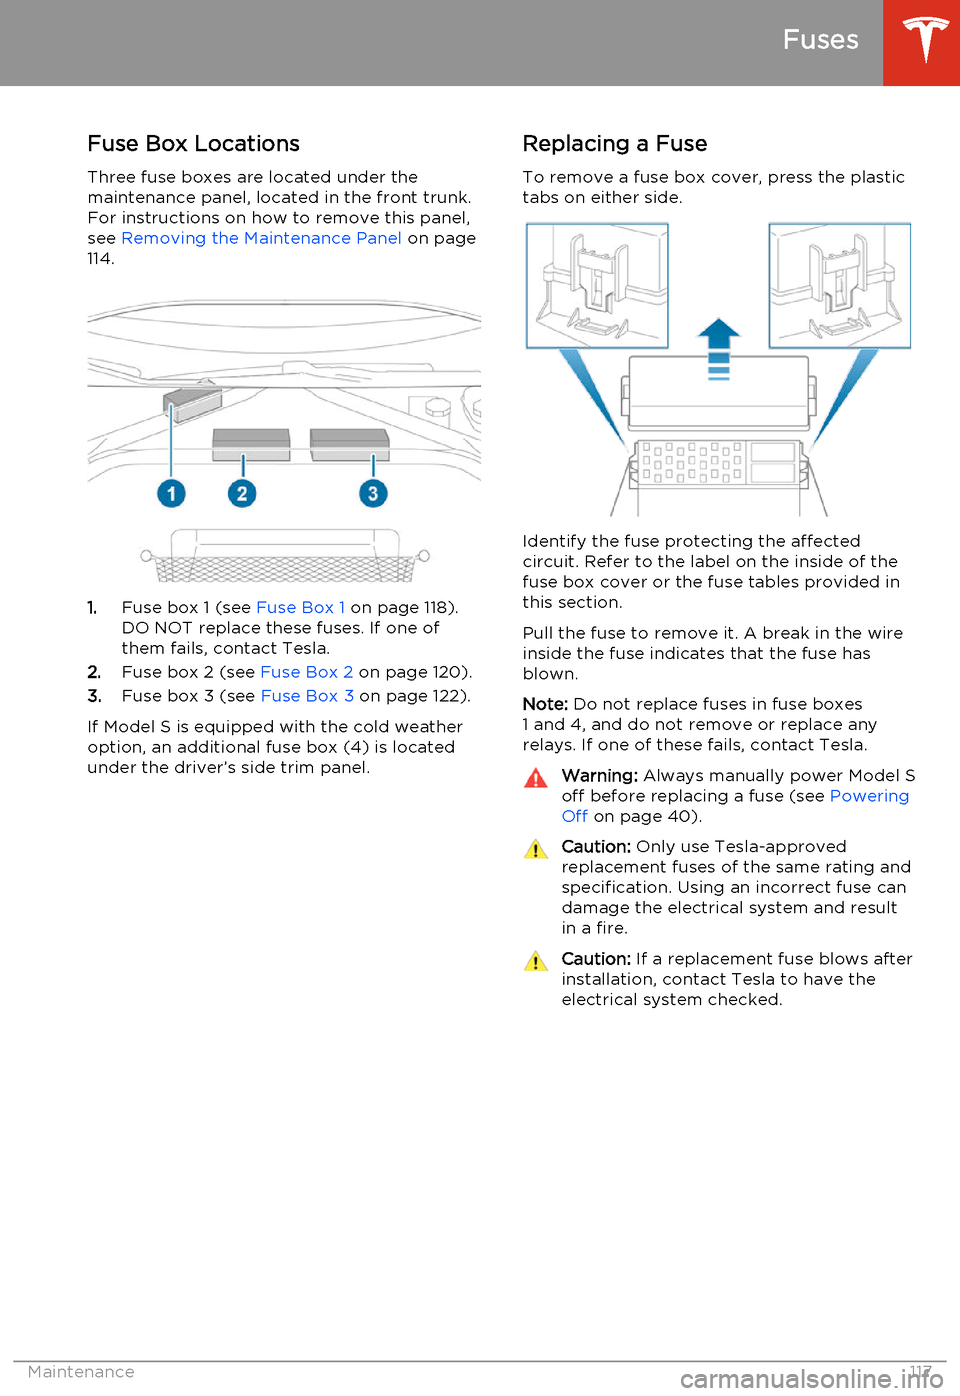 TESLA MODEL S 2014  Owners manual (North America) Fuse Box Locations
Three fuse boxes are located under the
maintenance panel, located in the front trunk.
For instructions on how to remove this panel,
see  Removing the Maintenance Panel  on page
114.